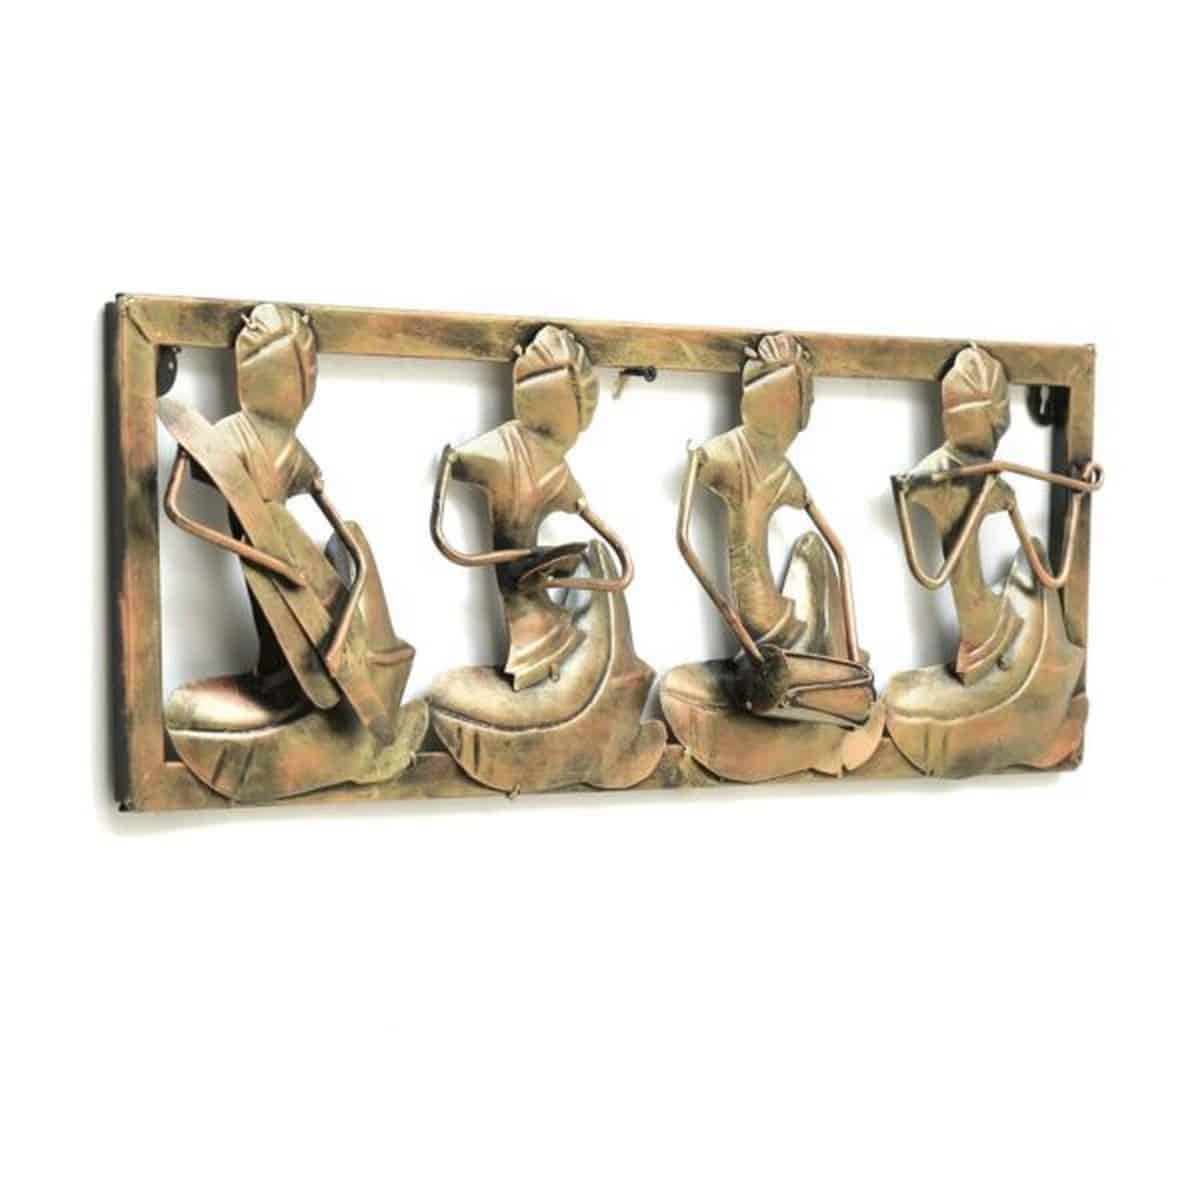 Frame of Iron Made Musician Statues for Wall Decoration  